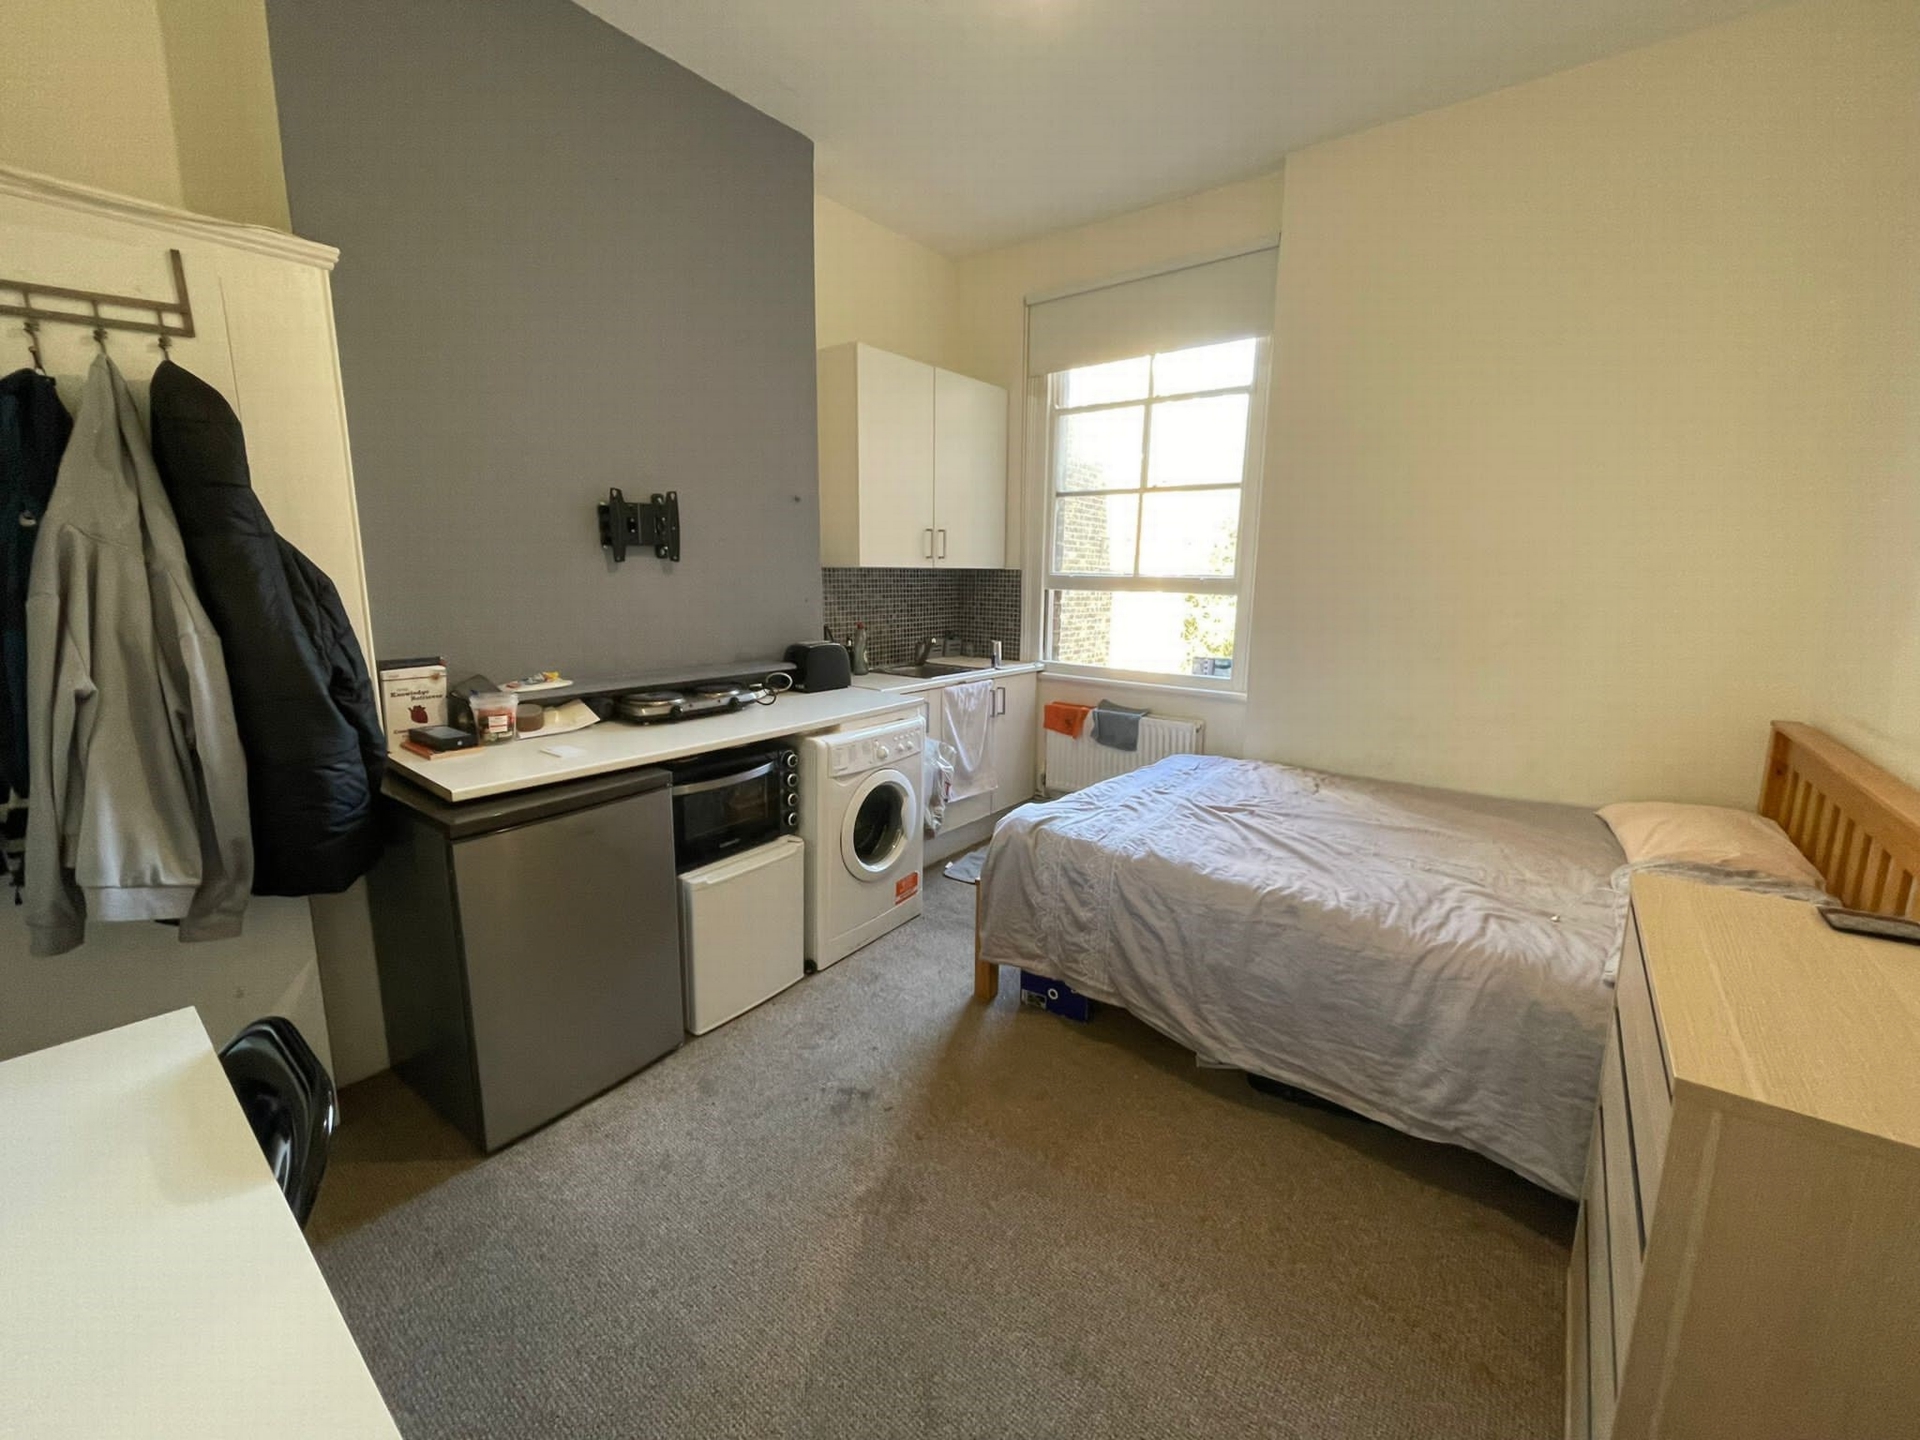 Similar Property: Room To Let in South Hampstead